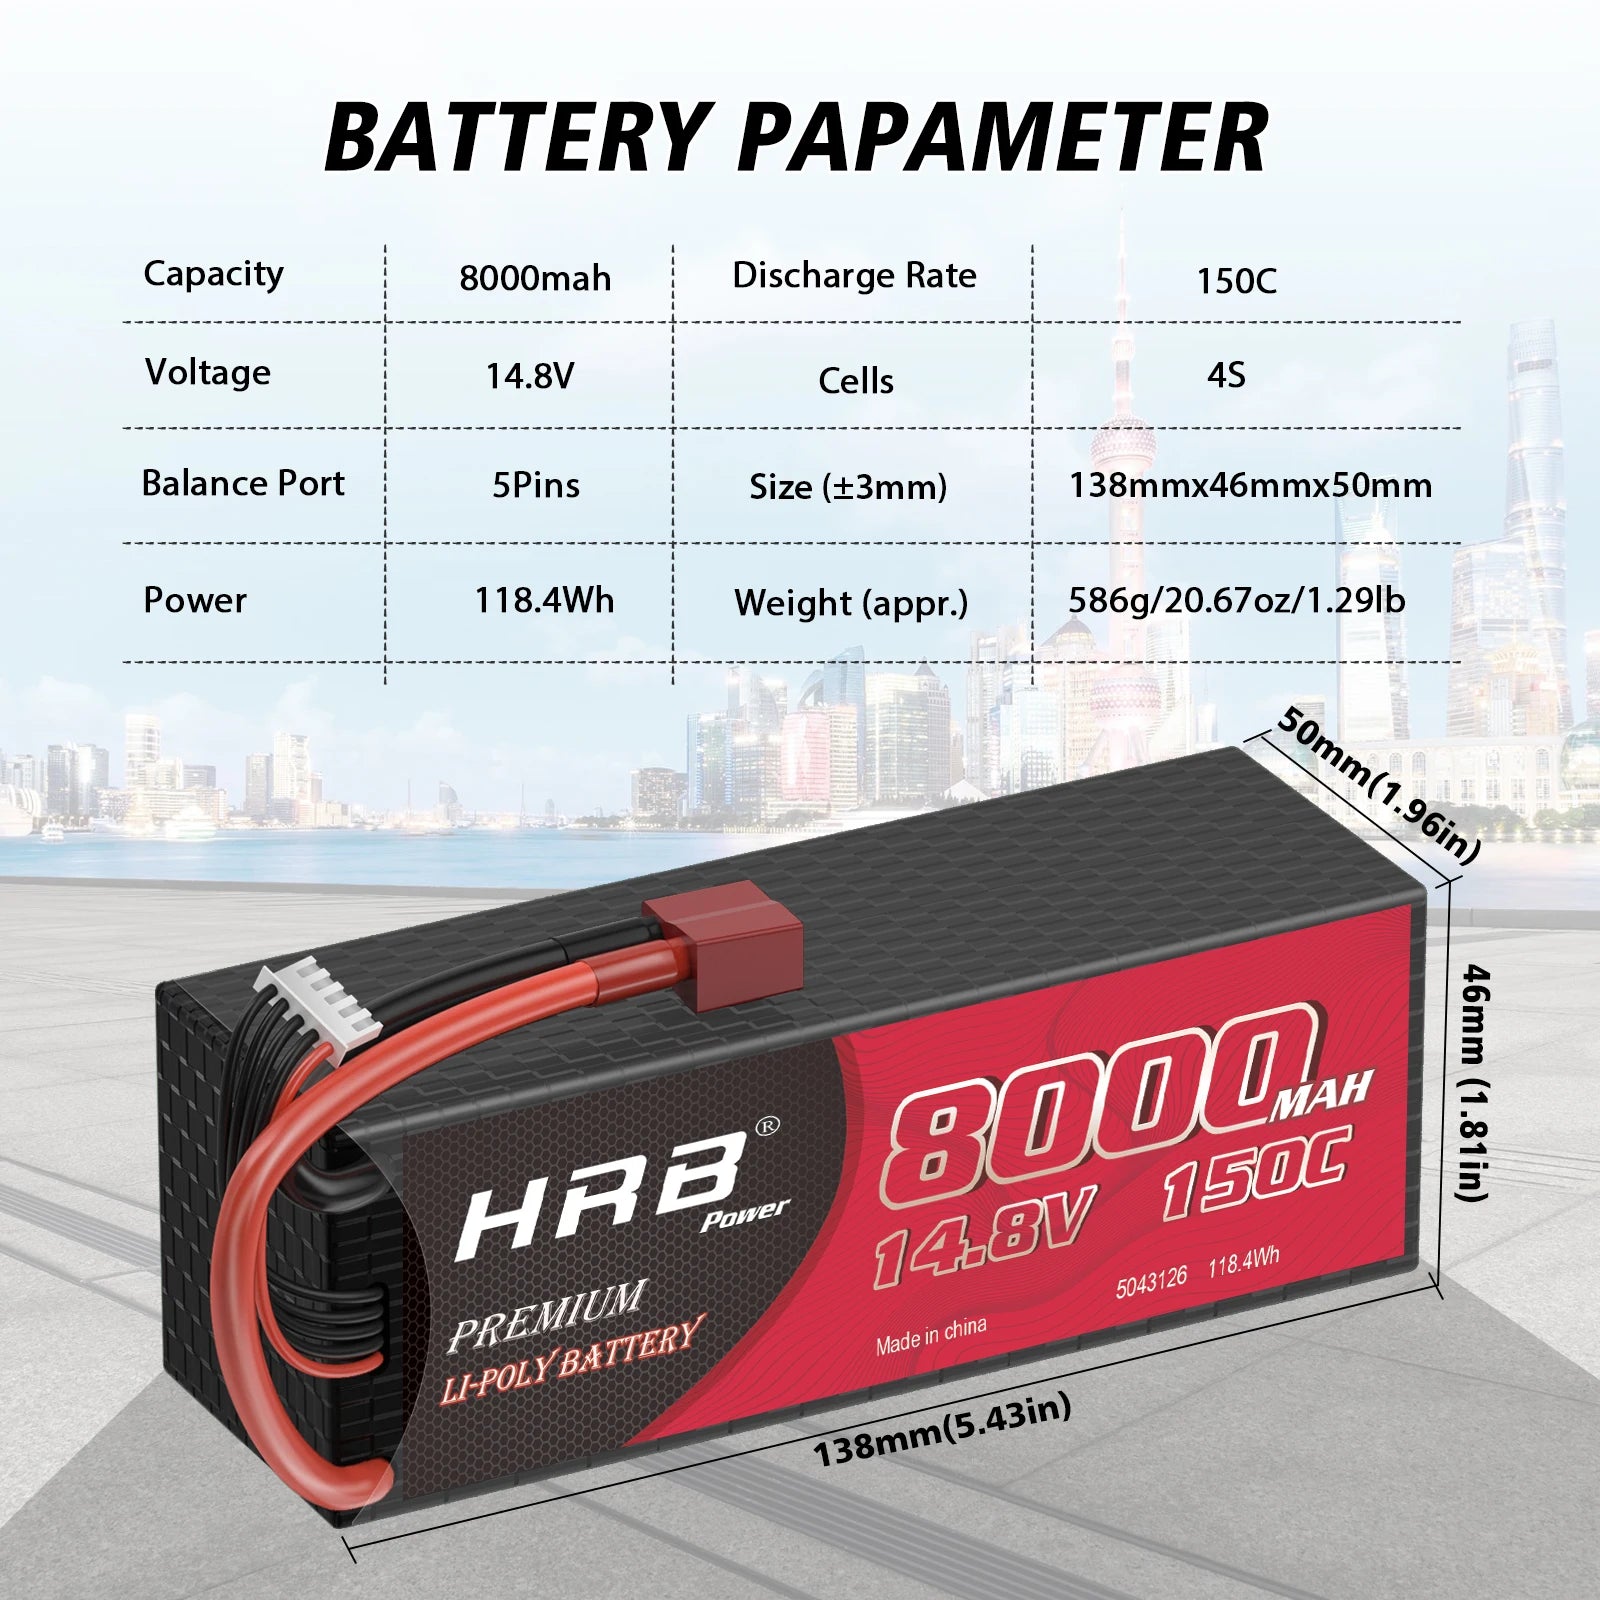 2PCS HRB 7.4V 2S 3S 4S Lipo Battery, BATTERY PAPAMETER Capacity 80OOmah Discharge Rate